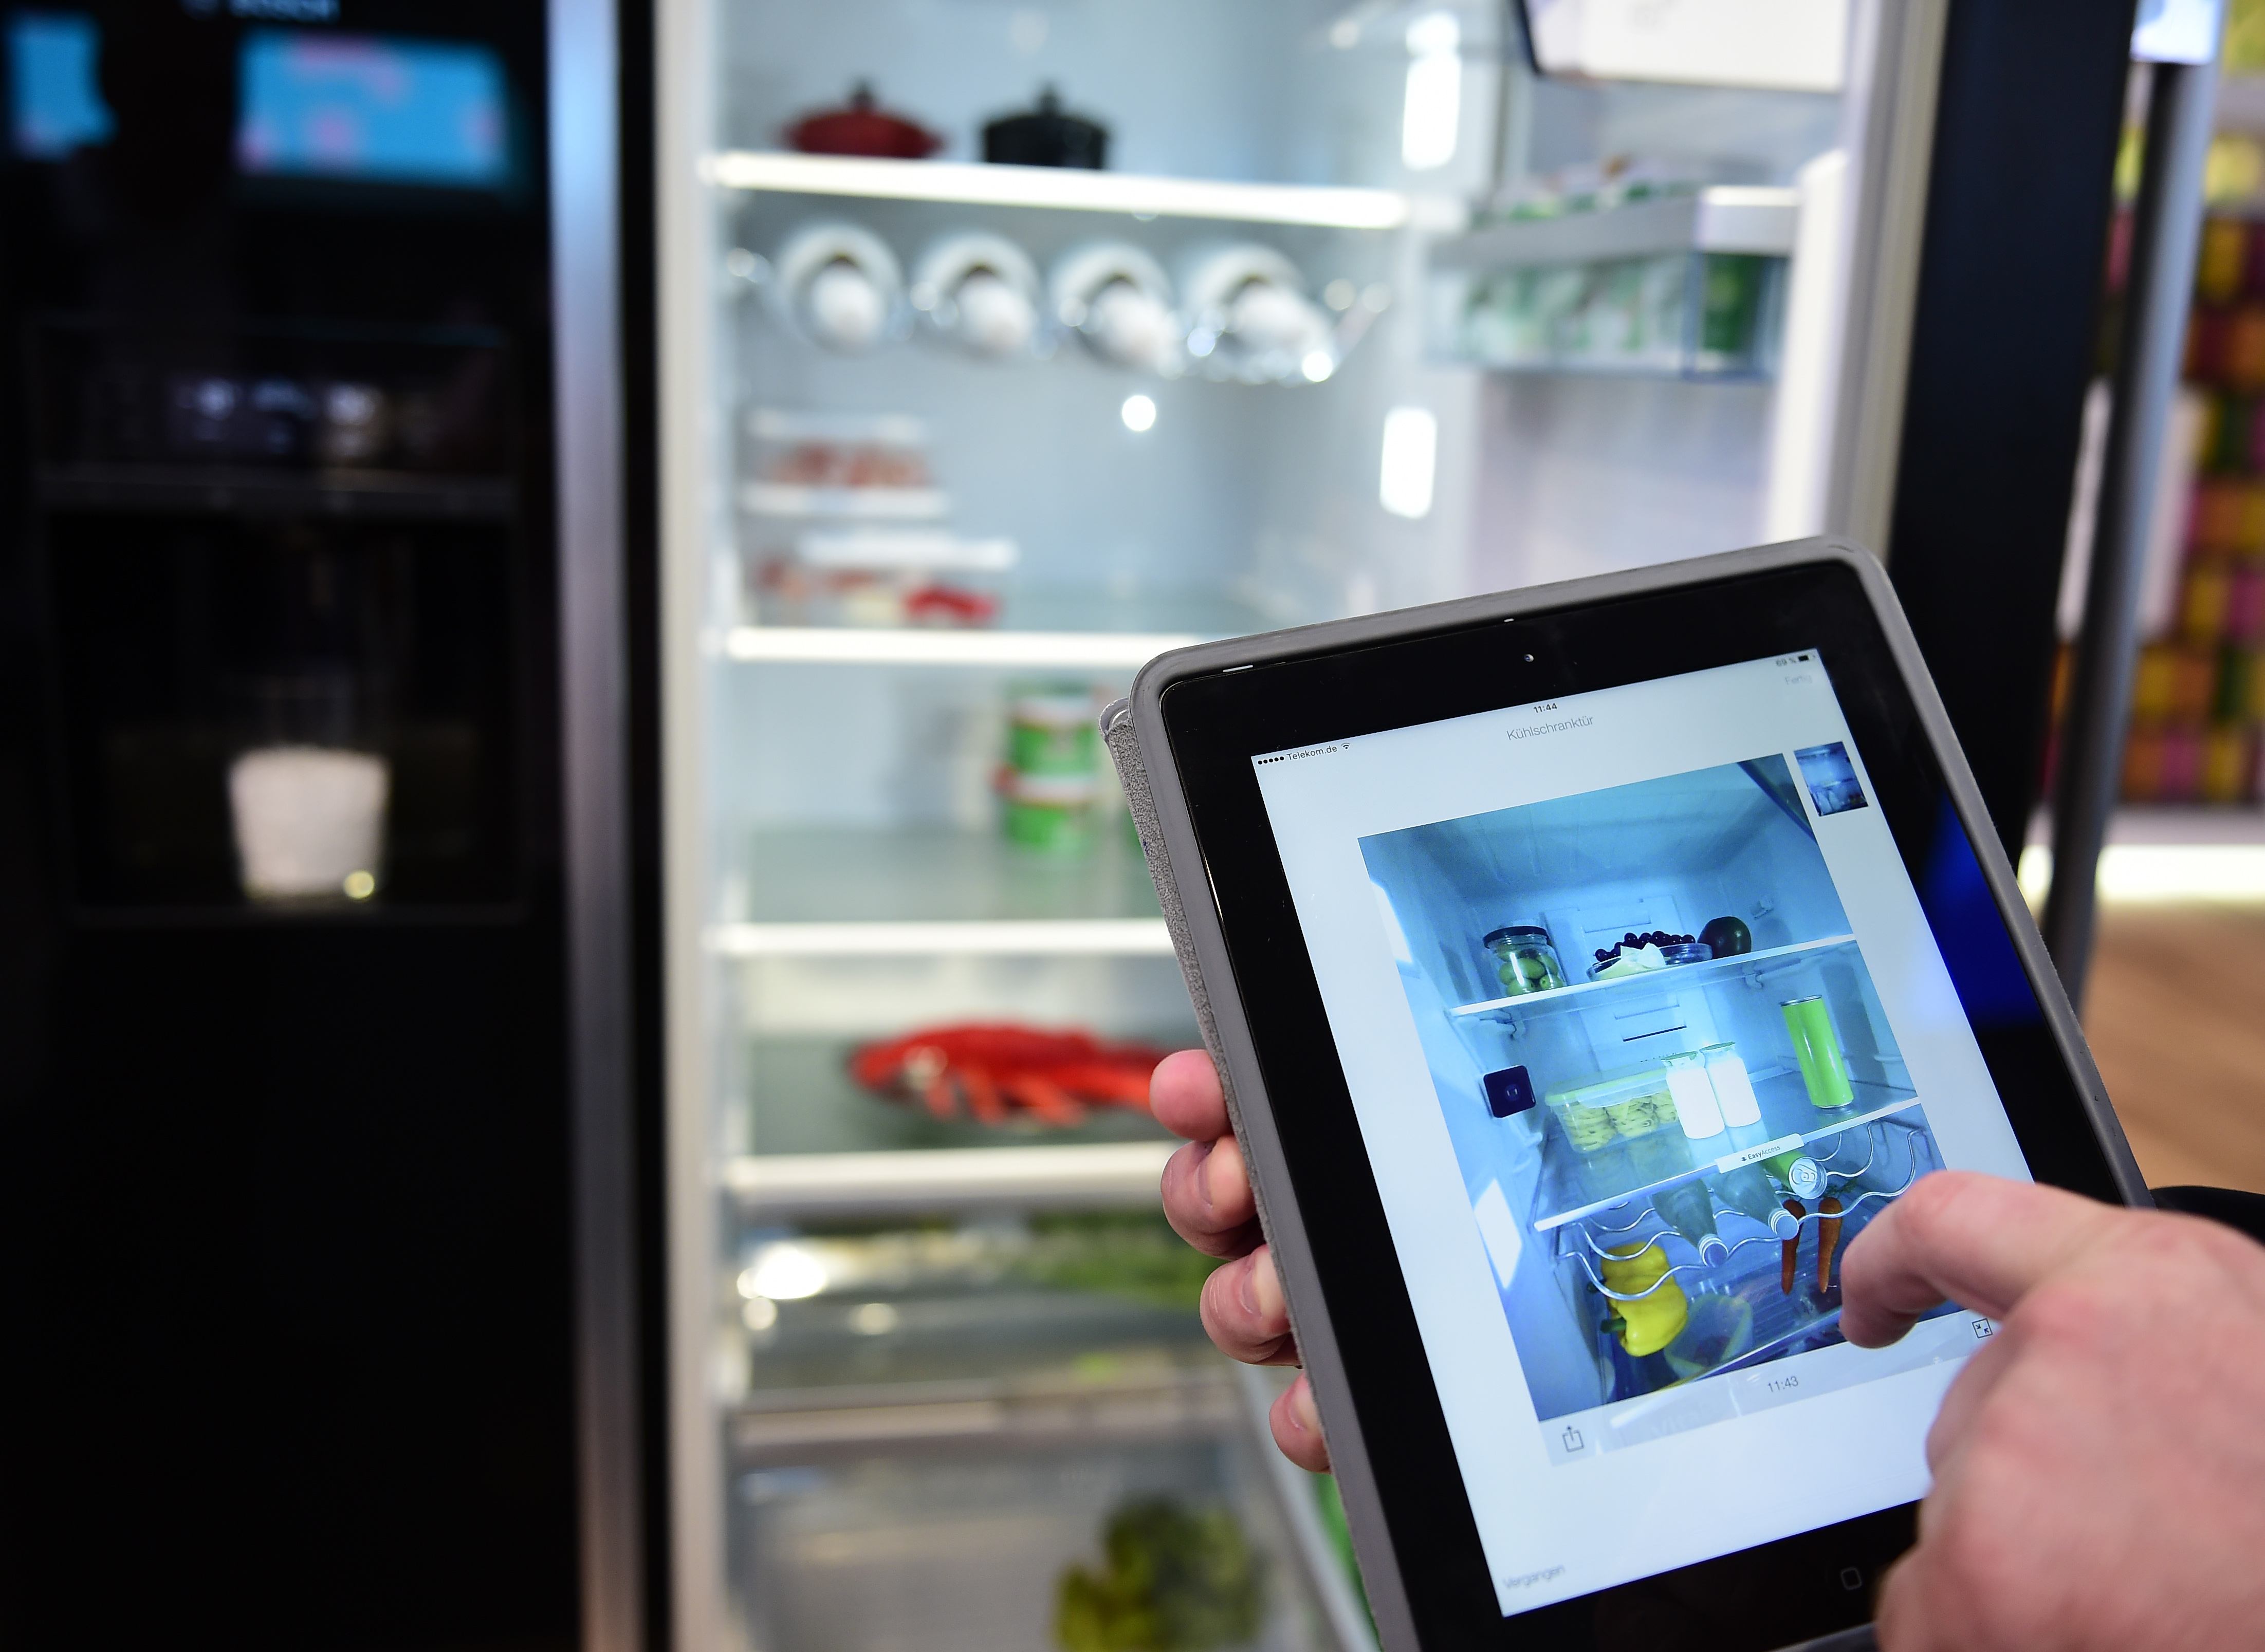 An employee shows the app to control a camera inside a fridge at the booth of Bosch at the IFA (Internationale Funkausstellung) electronics trade fair in Berlin on September 1, 2016.  The IFA is considered the worldwide biggest leading fair for entertainment electronics, IT and household appliances and opens its doors from September 2 till 7. / AFP PHOTO / TOBIAS SCHWARZ